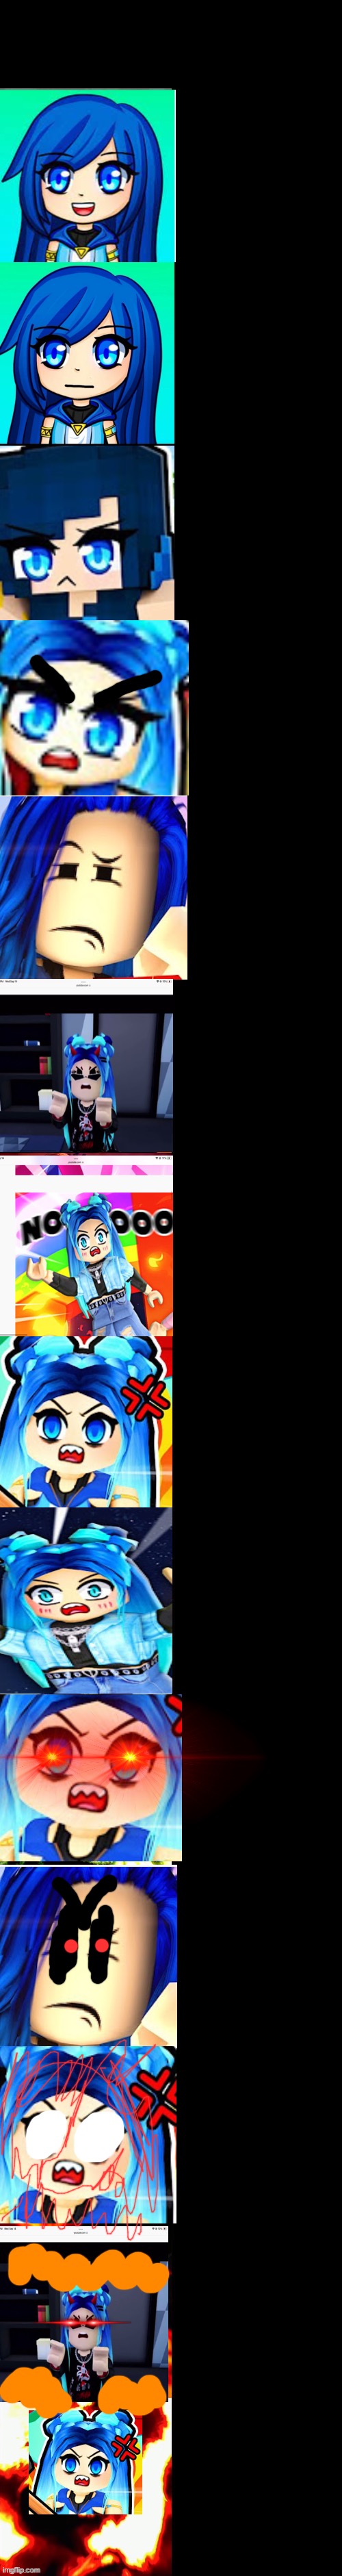 itsfunneh becoming angry Extended (no original) | image tagged in mr incredible becoming angry extended | made w/ Imgflip meme maker